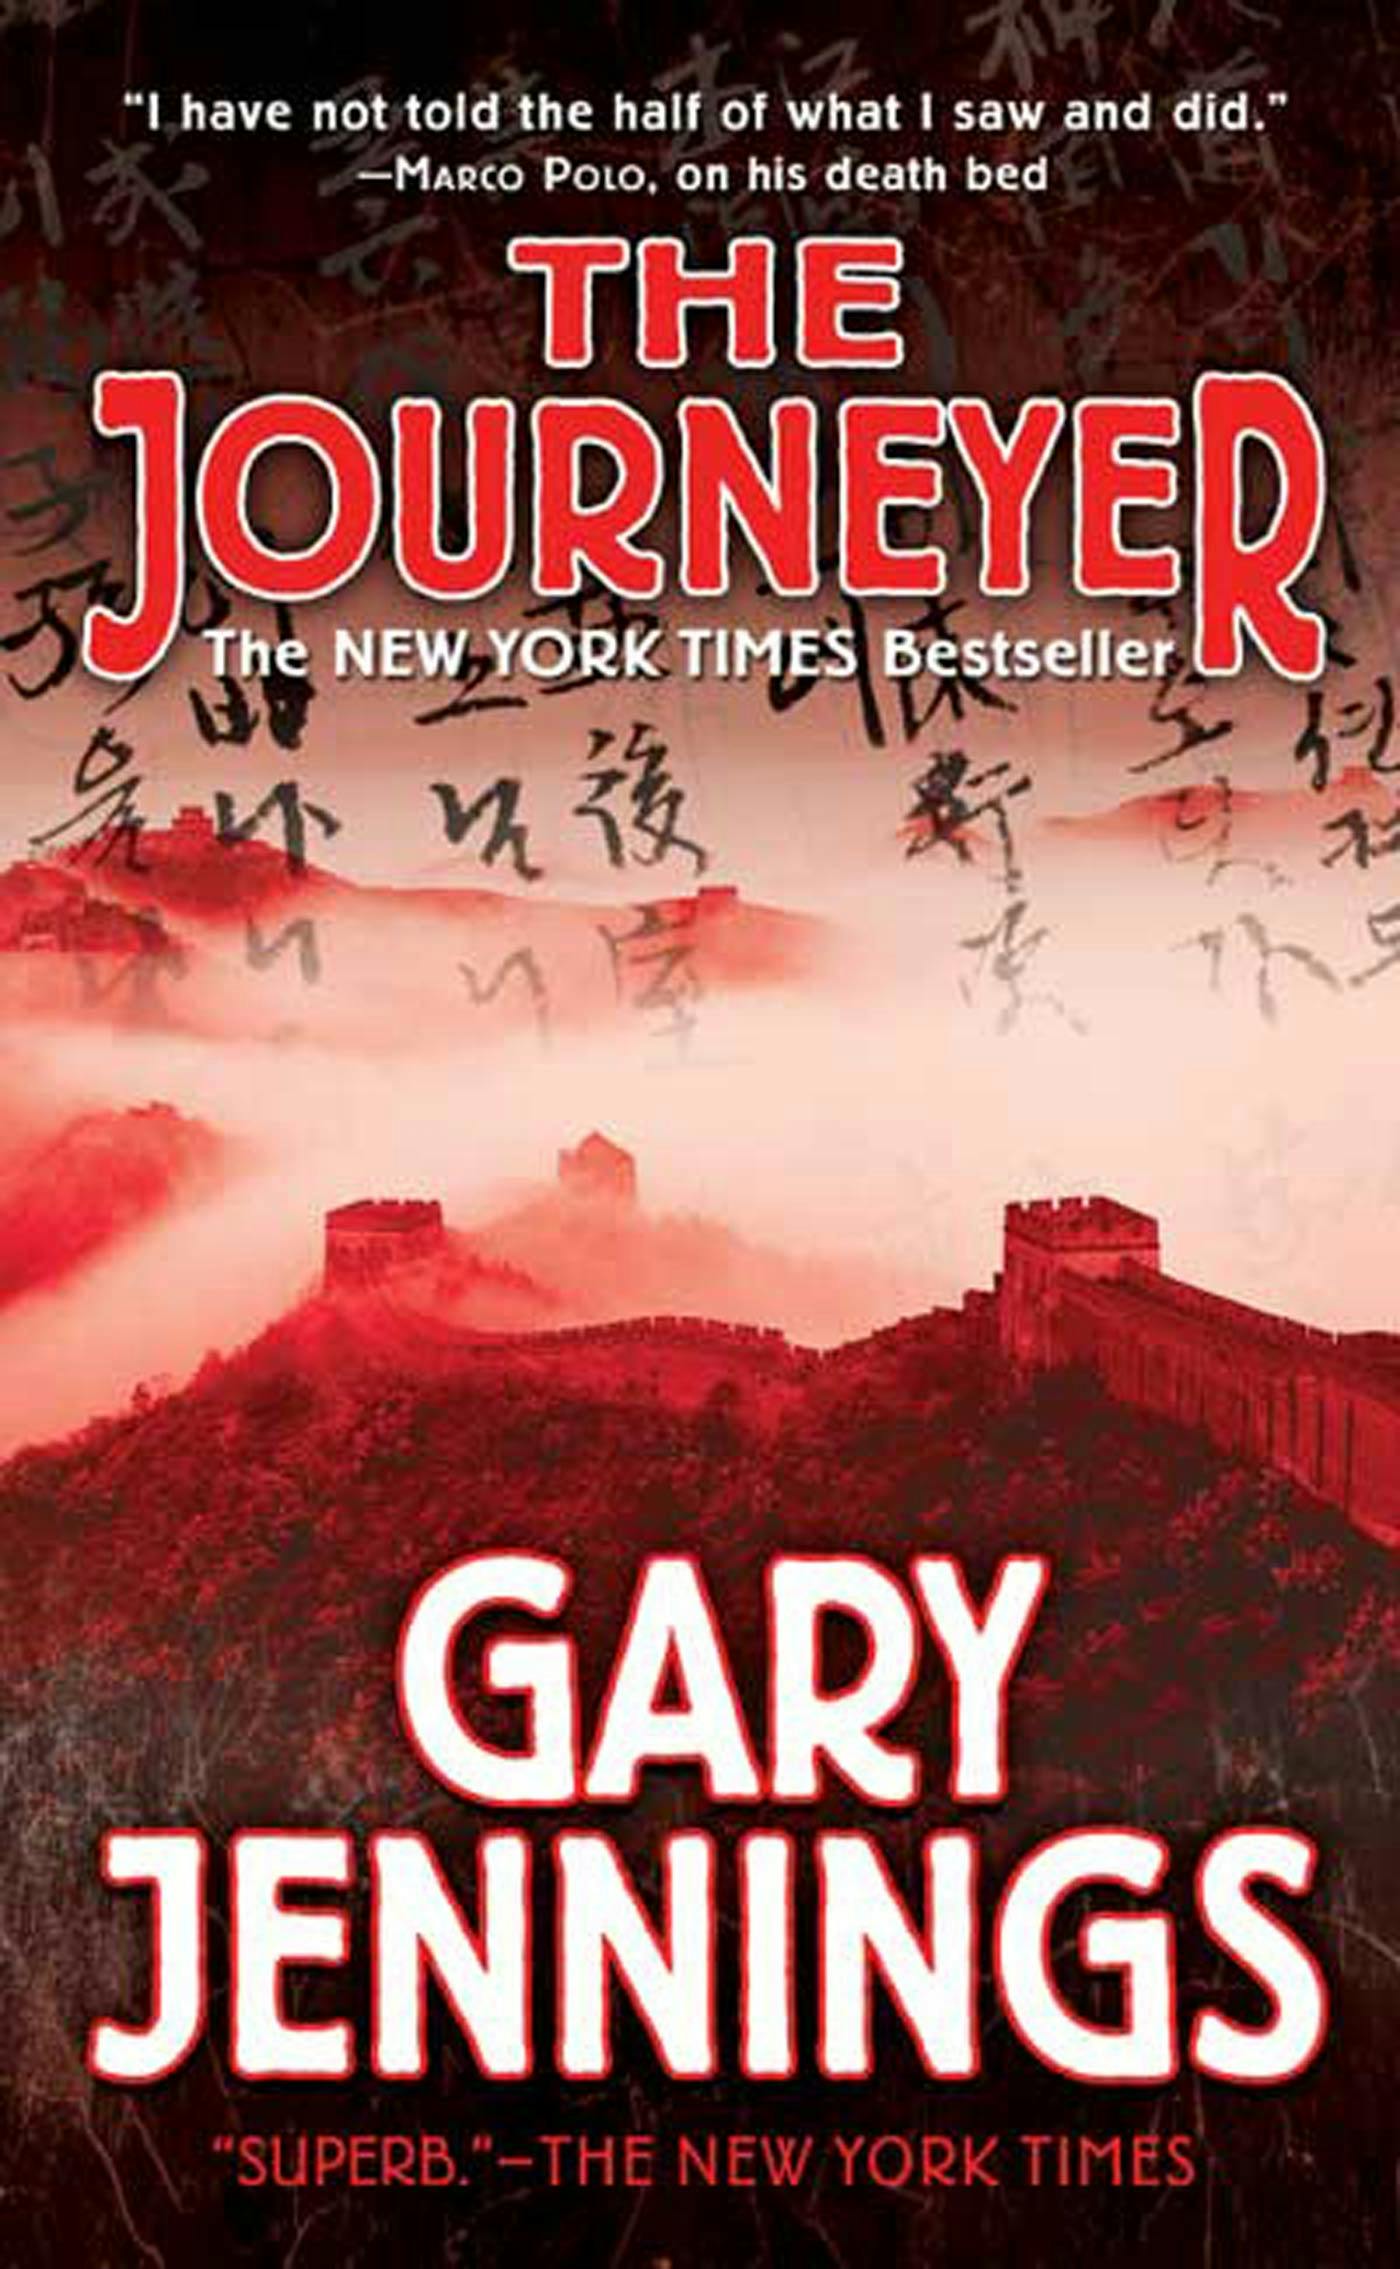 Cover for the book titled as: The Journeyer